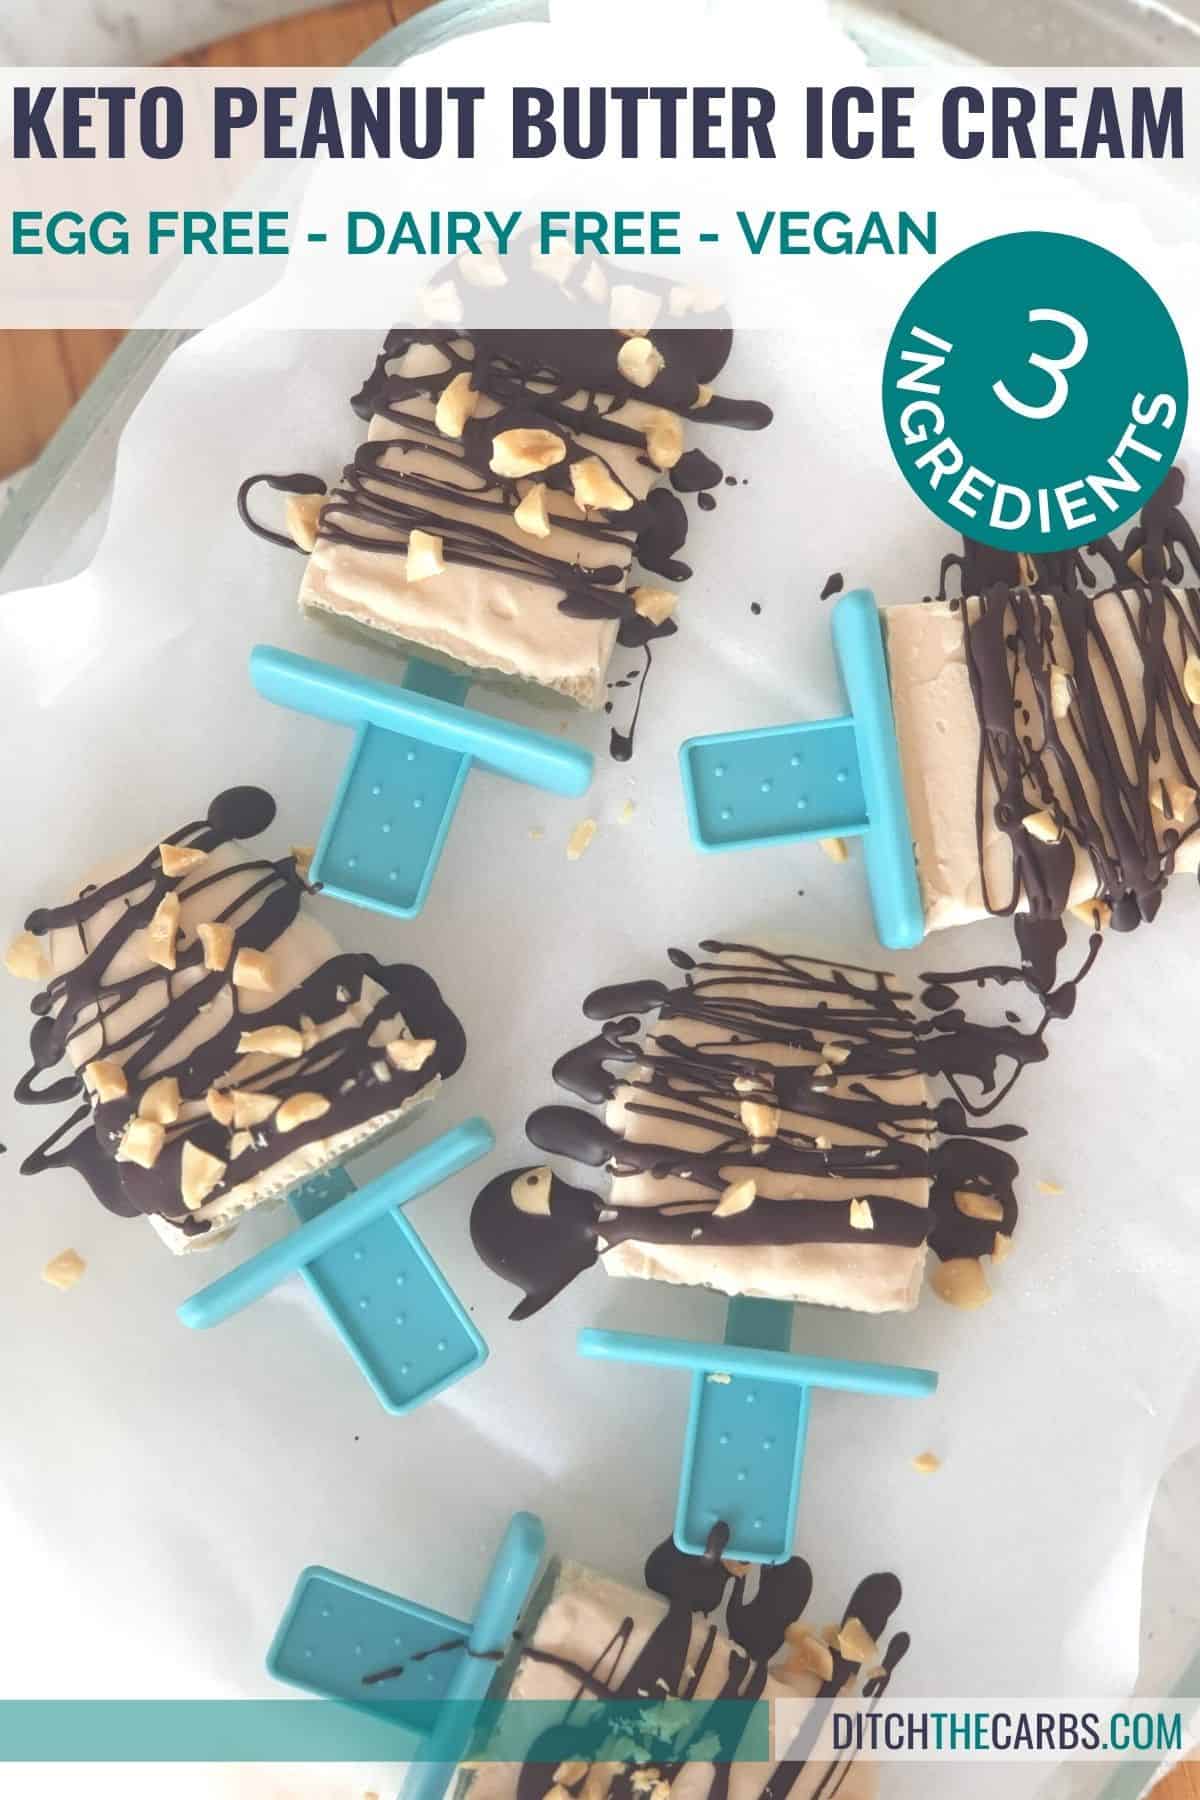 Keto peanut butter ice cream cubes sit on a glass plate and blue cloth